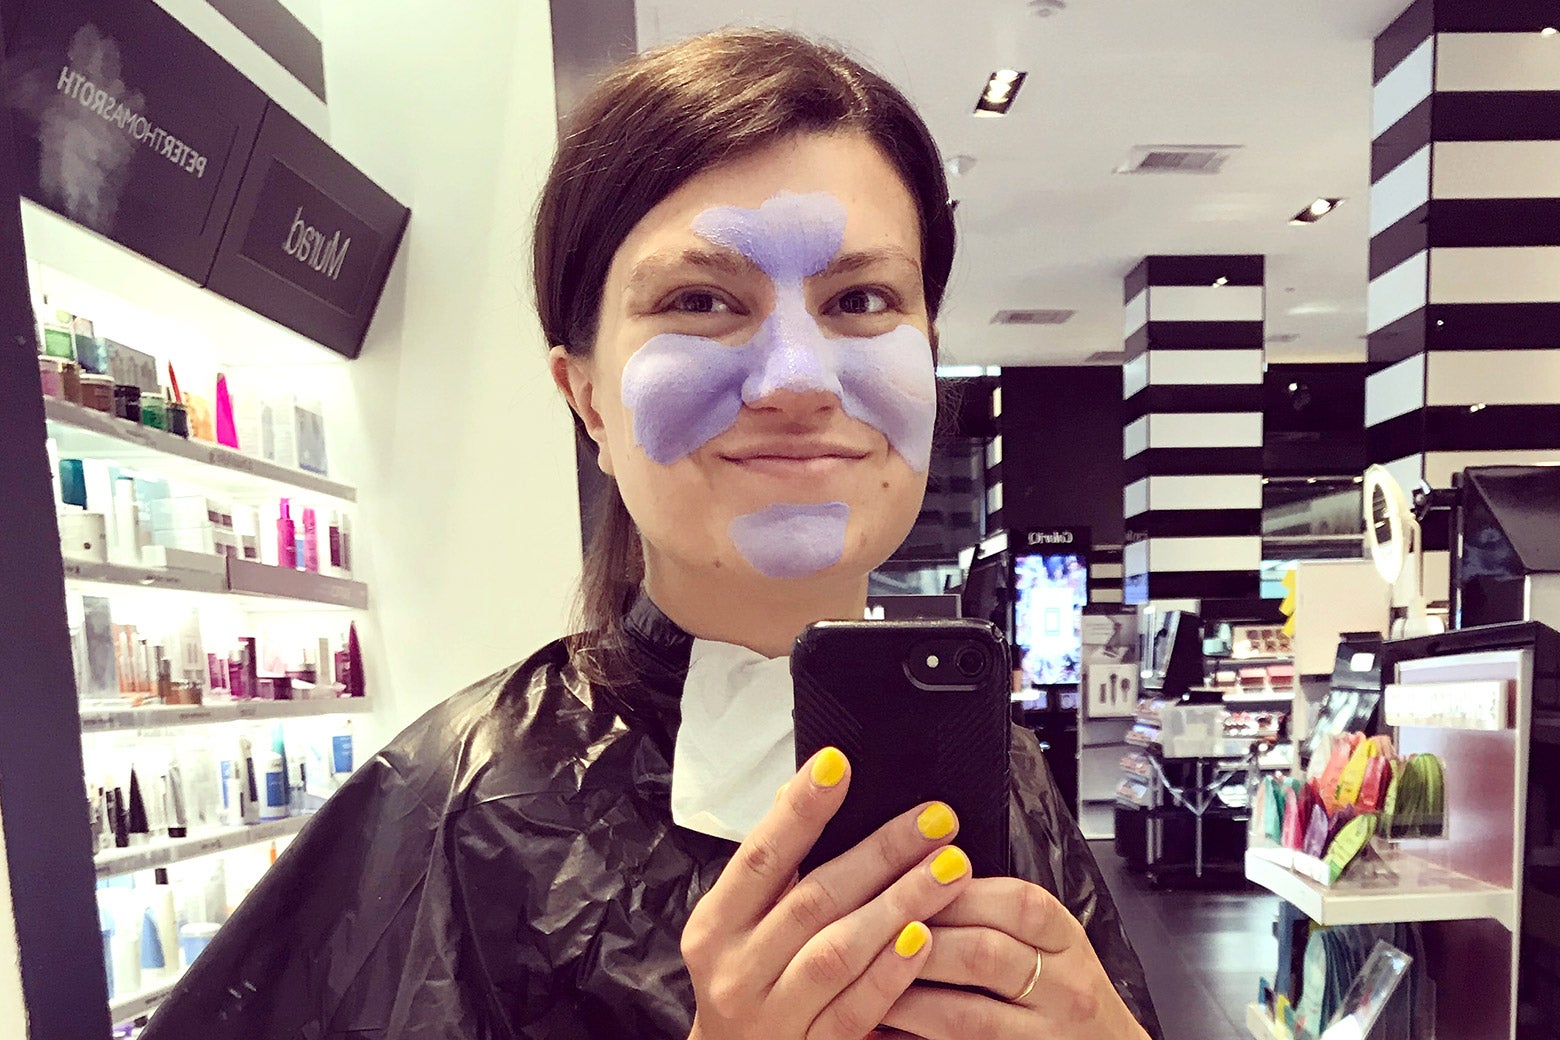 The author in a facial mask at Sephora.